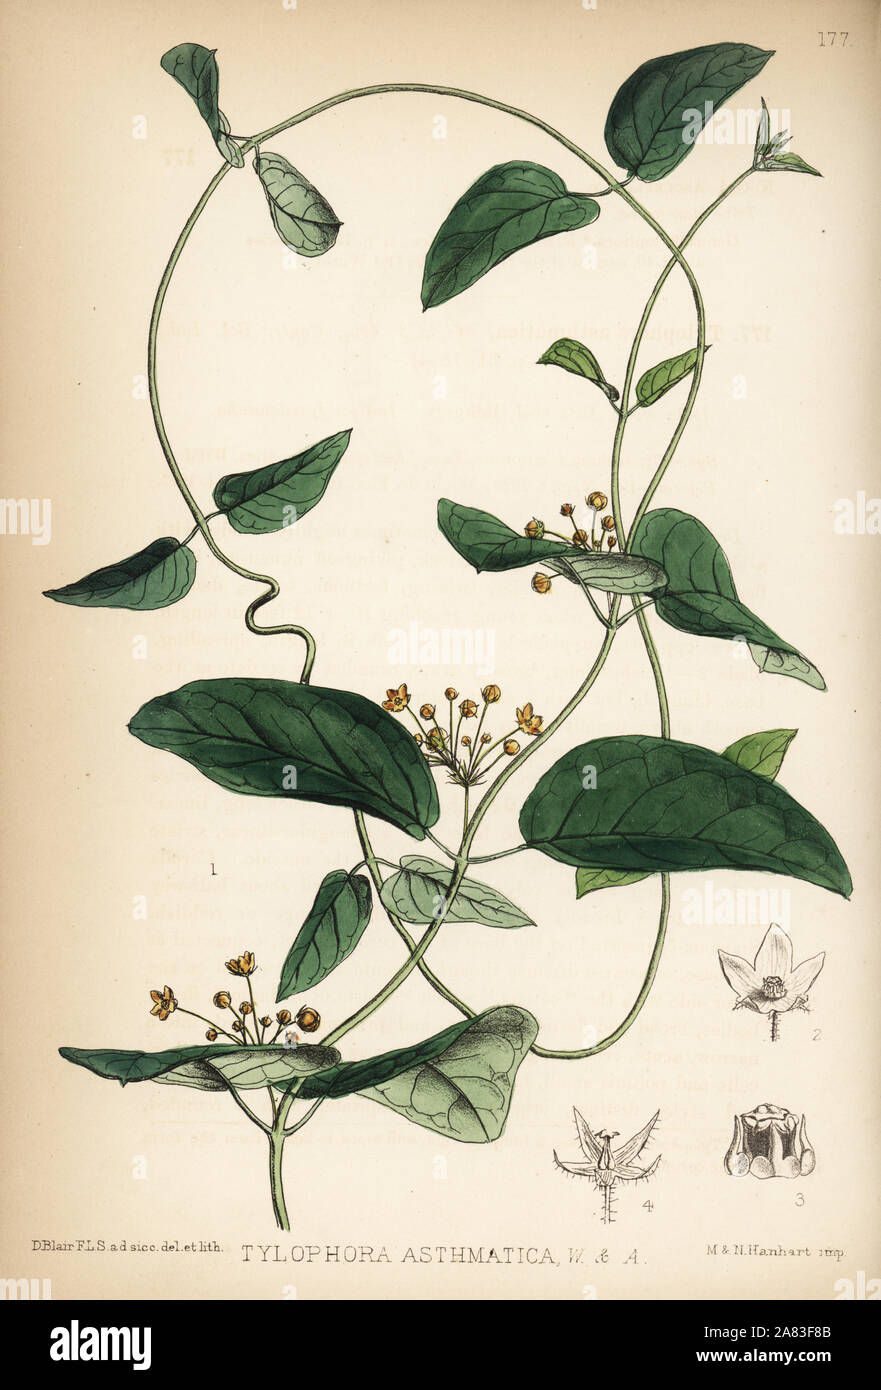 Indian ipecacuanha or unta mool, Tylophora asthmatica. Handcoloured lithograph by Hanhart after a botanical illustration by David Blair from Robert Bentley and Henry Trimen's Medicinal Plants, London, 1880. Stock Photo